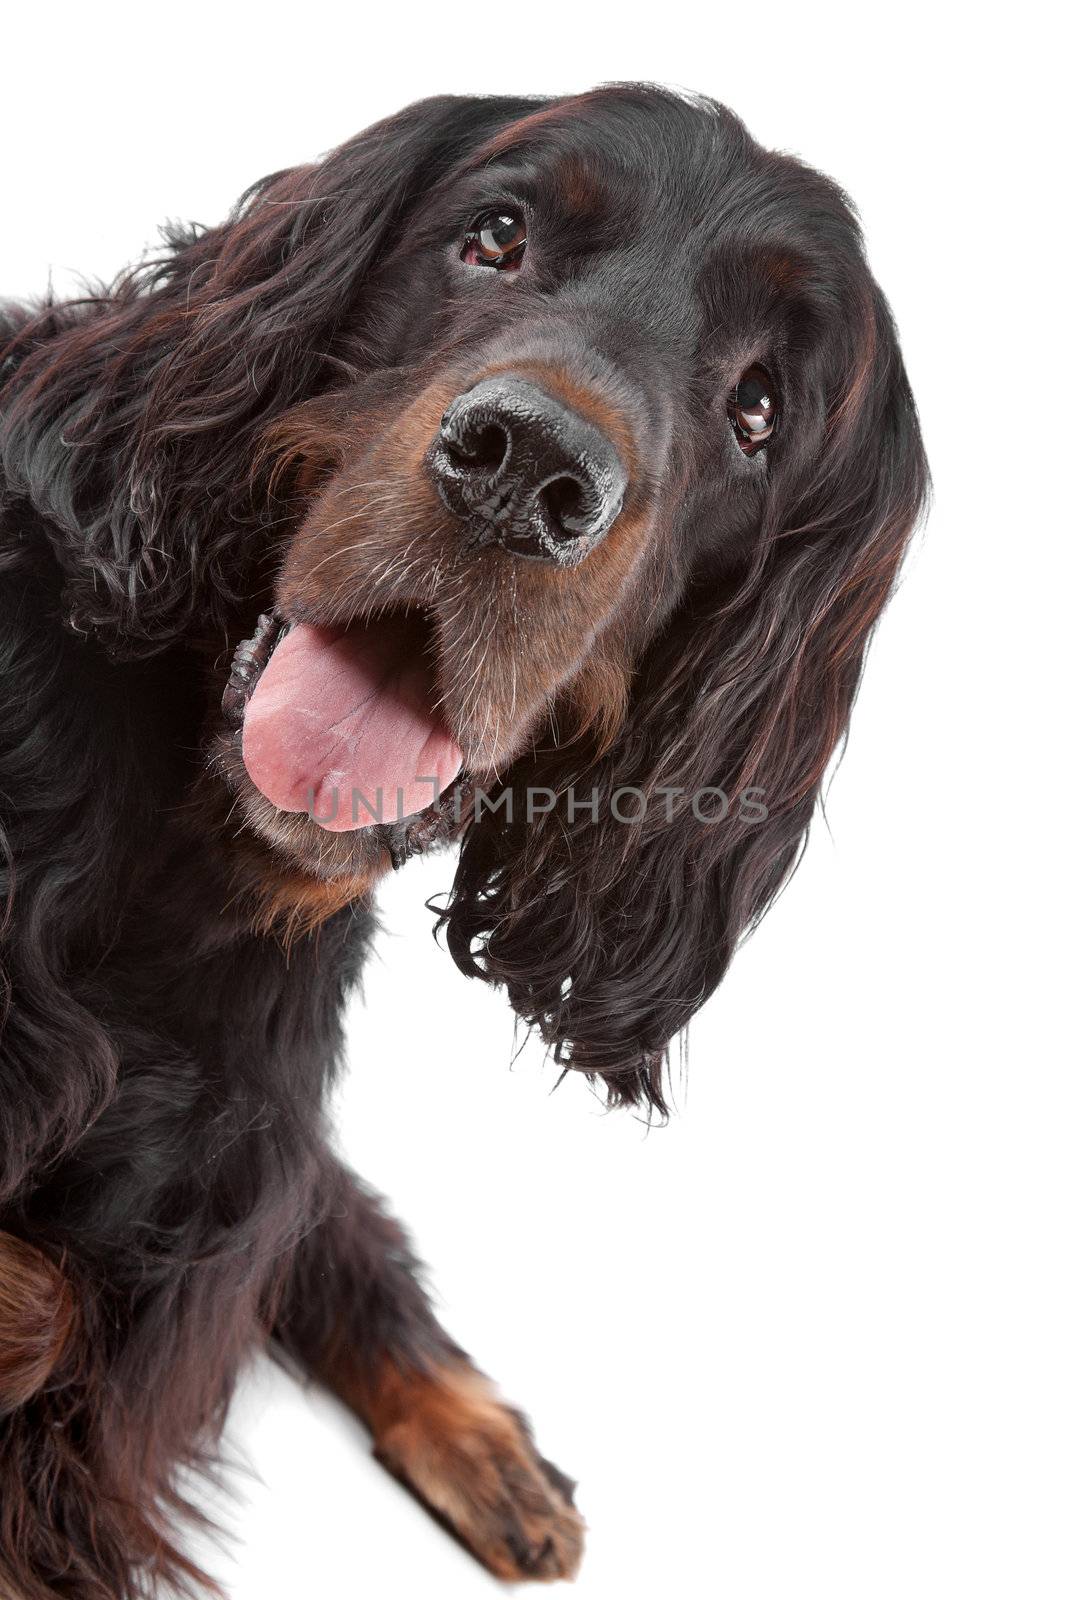 Front view of Irish Setter dog on a white background